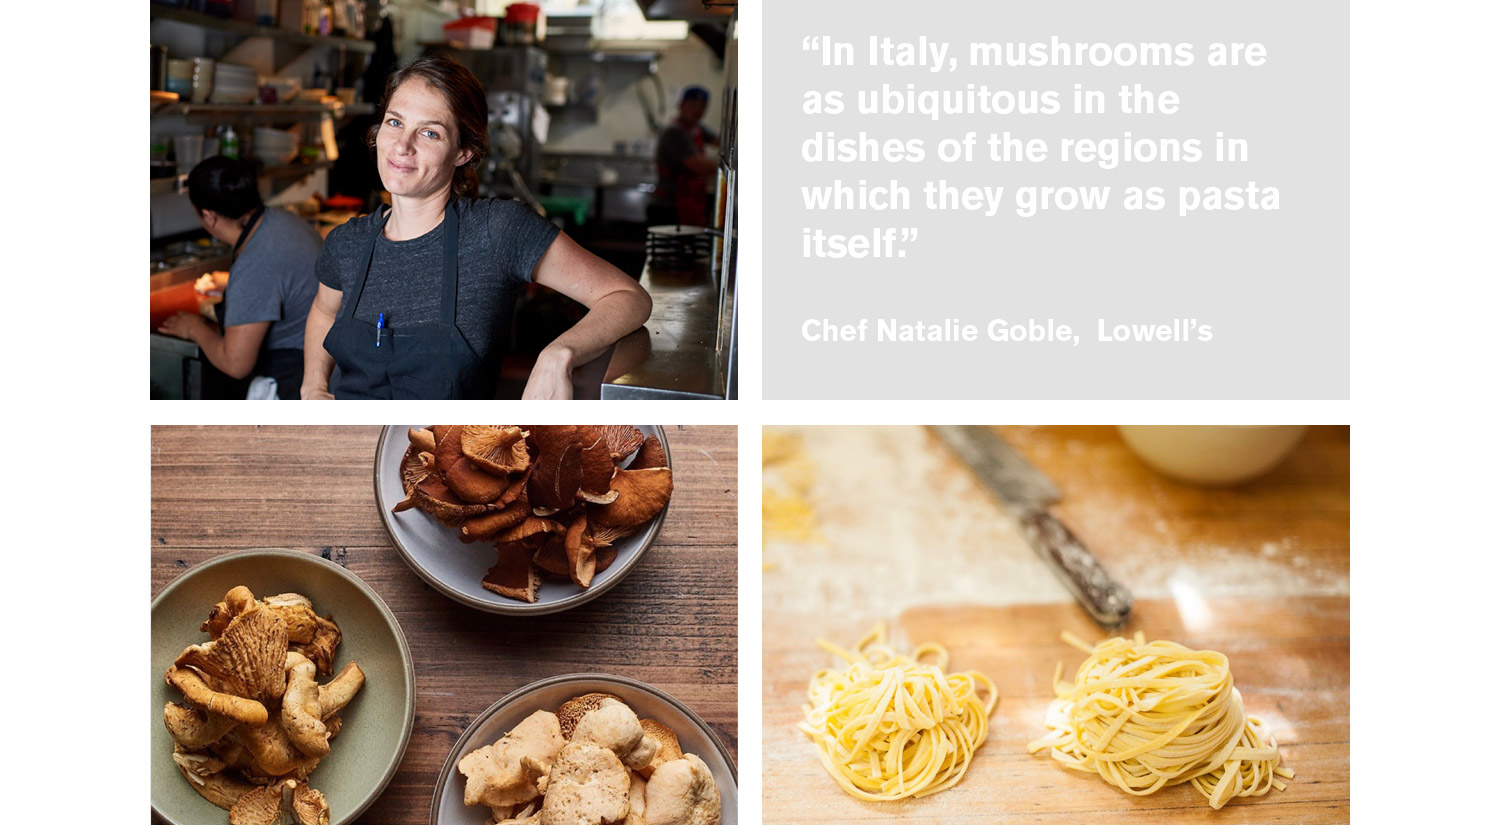 Top Left: Natalie Goble, chef/co-owner, Lowell's (Sonoma, California, USA)